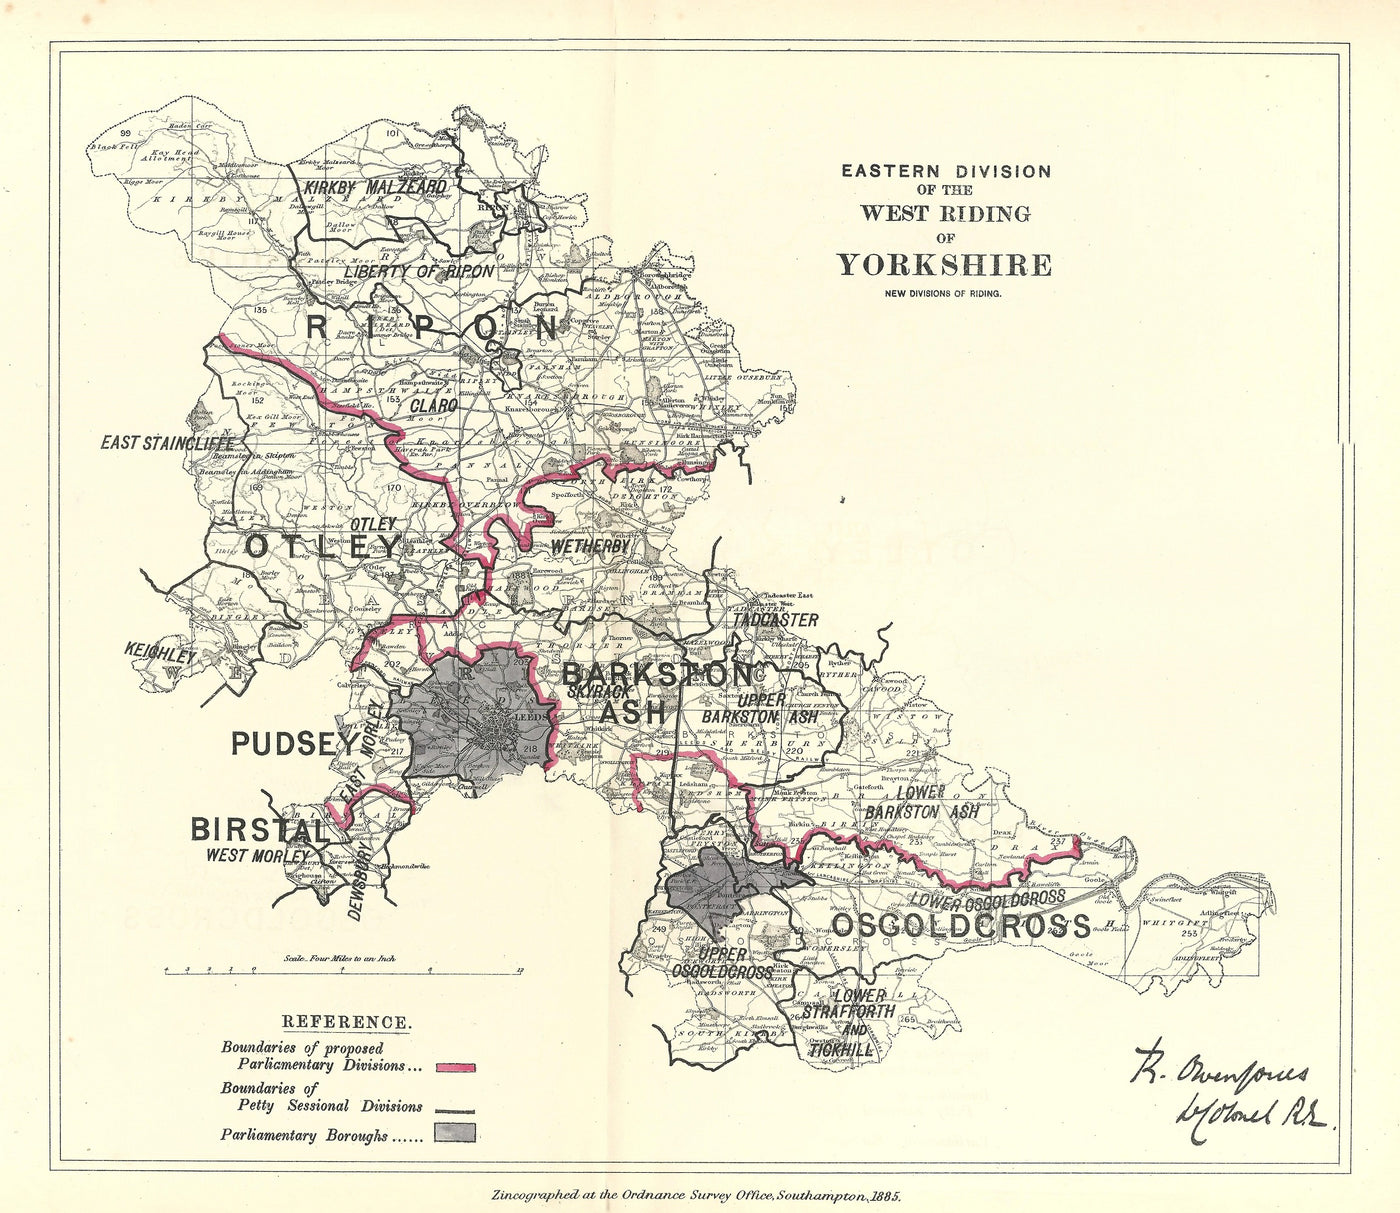 Yorkshire West Riding Eastern Division antique map